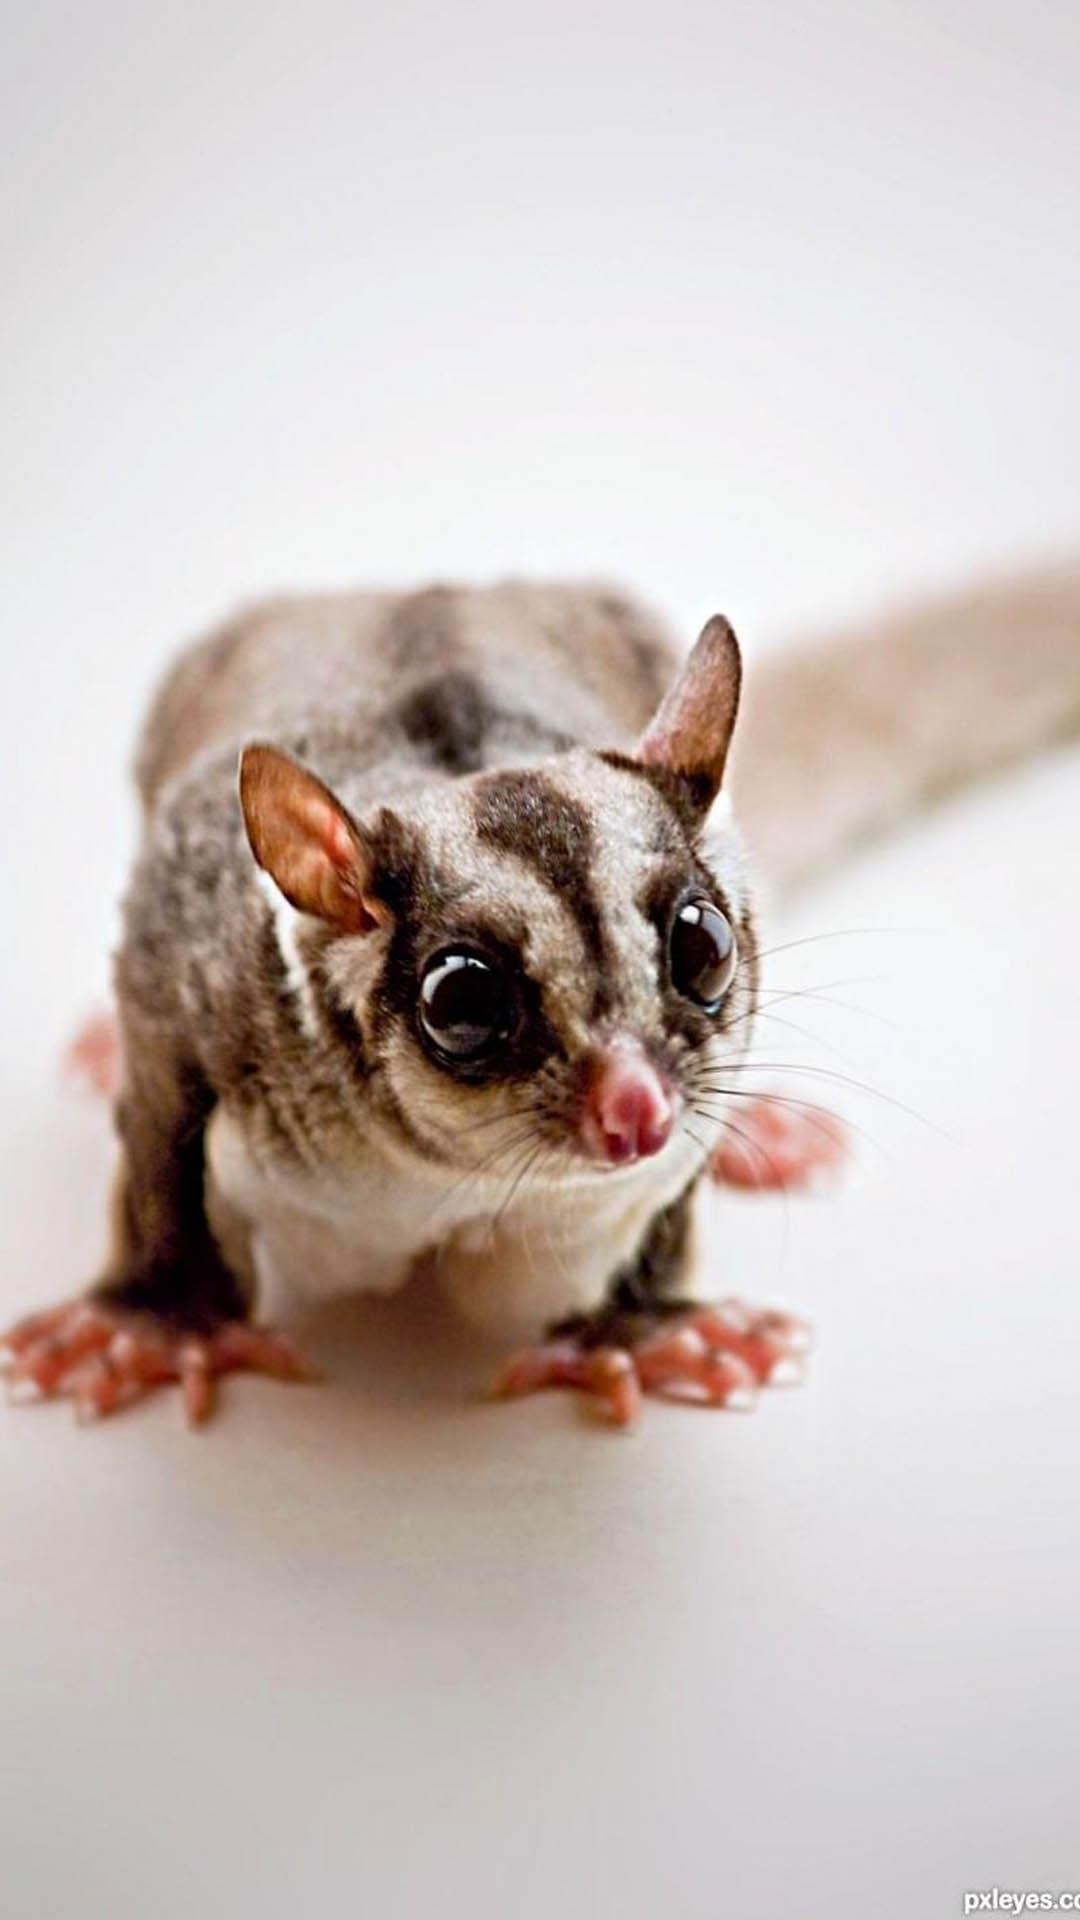 Sugar gliders wallpapers, Nature's cuteness, Adorable creatures, Wallpapers for animal lovers, 1080x1920 Full HD Phone